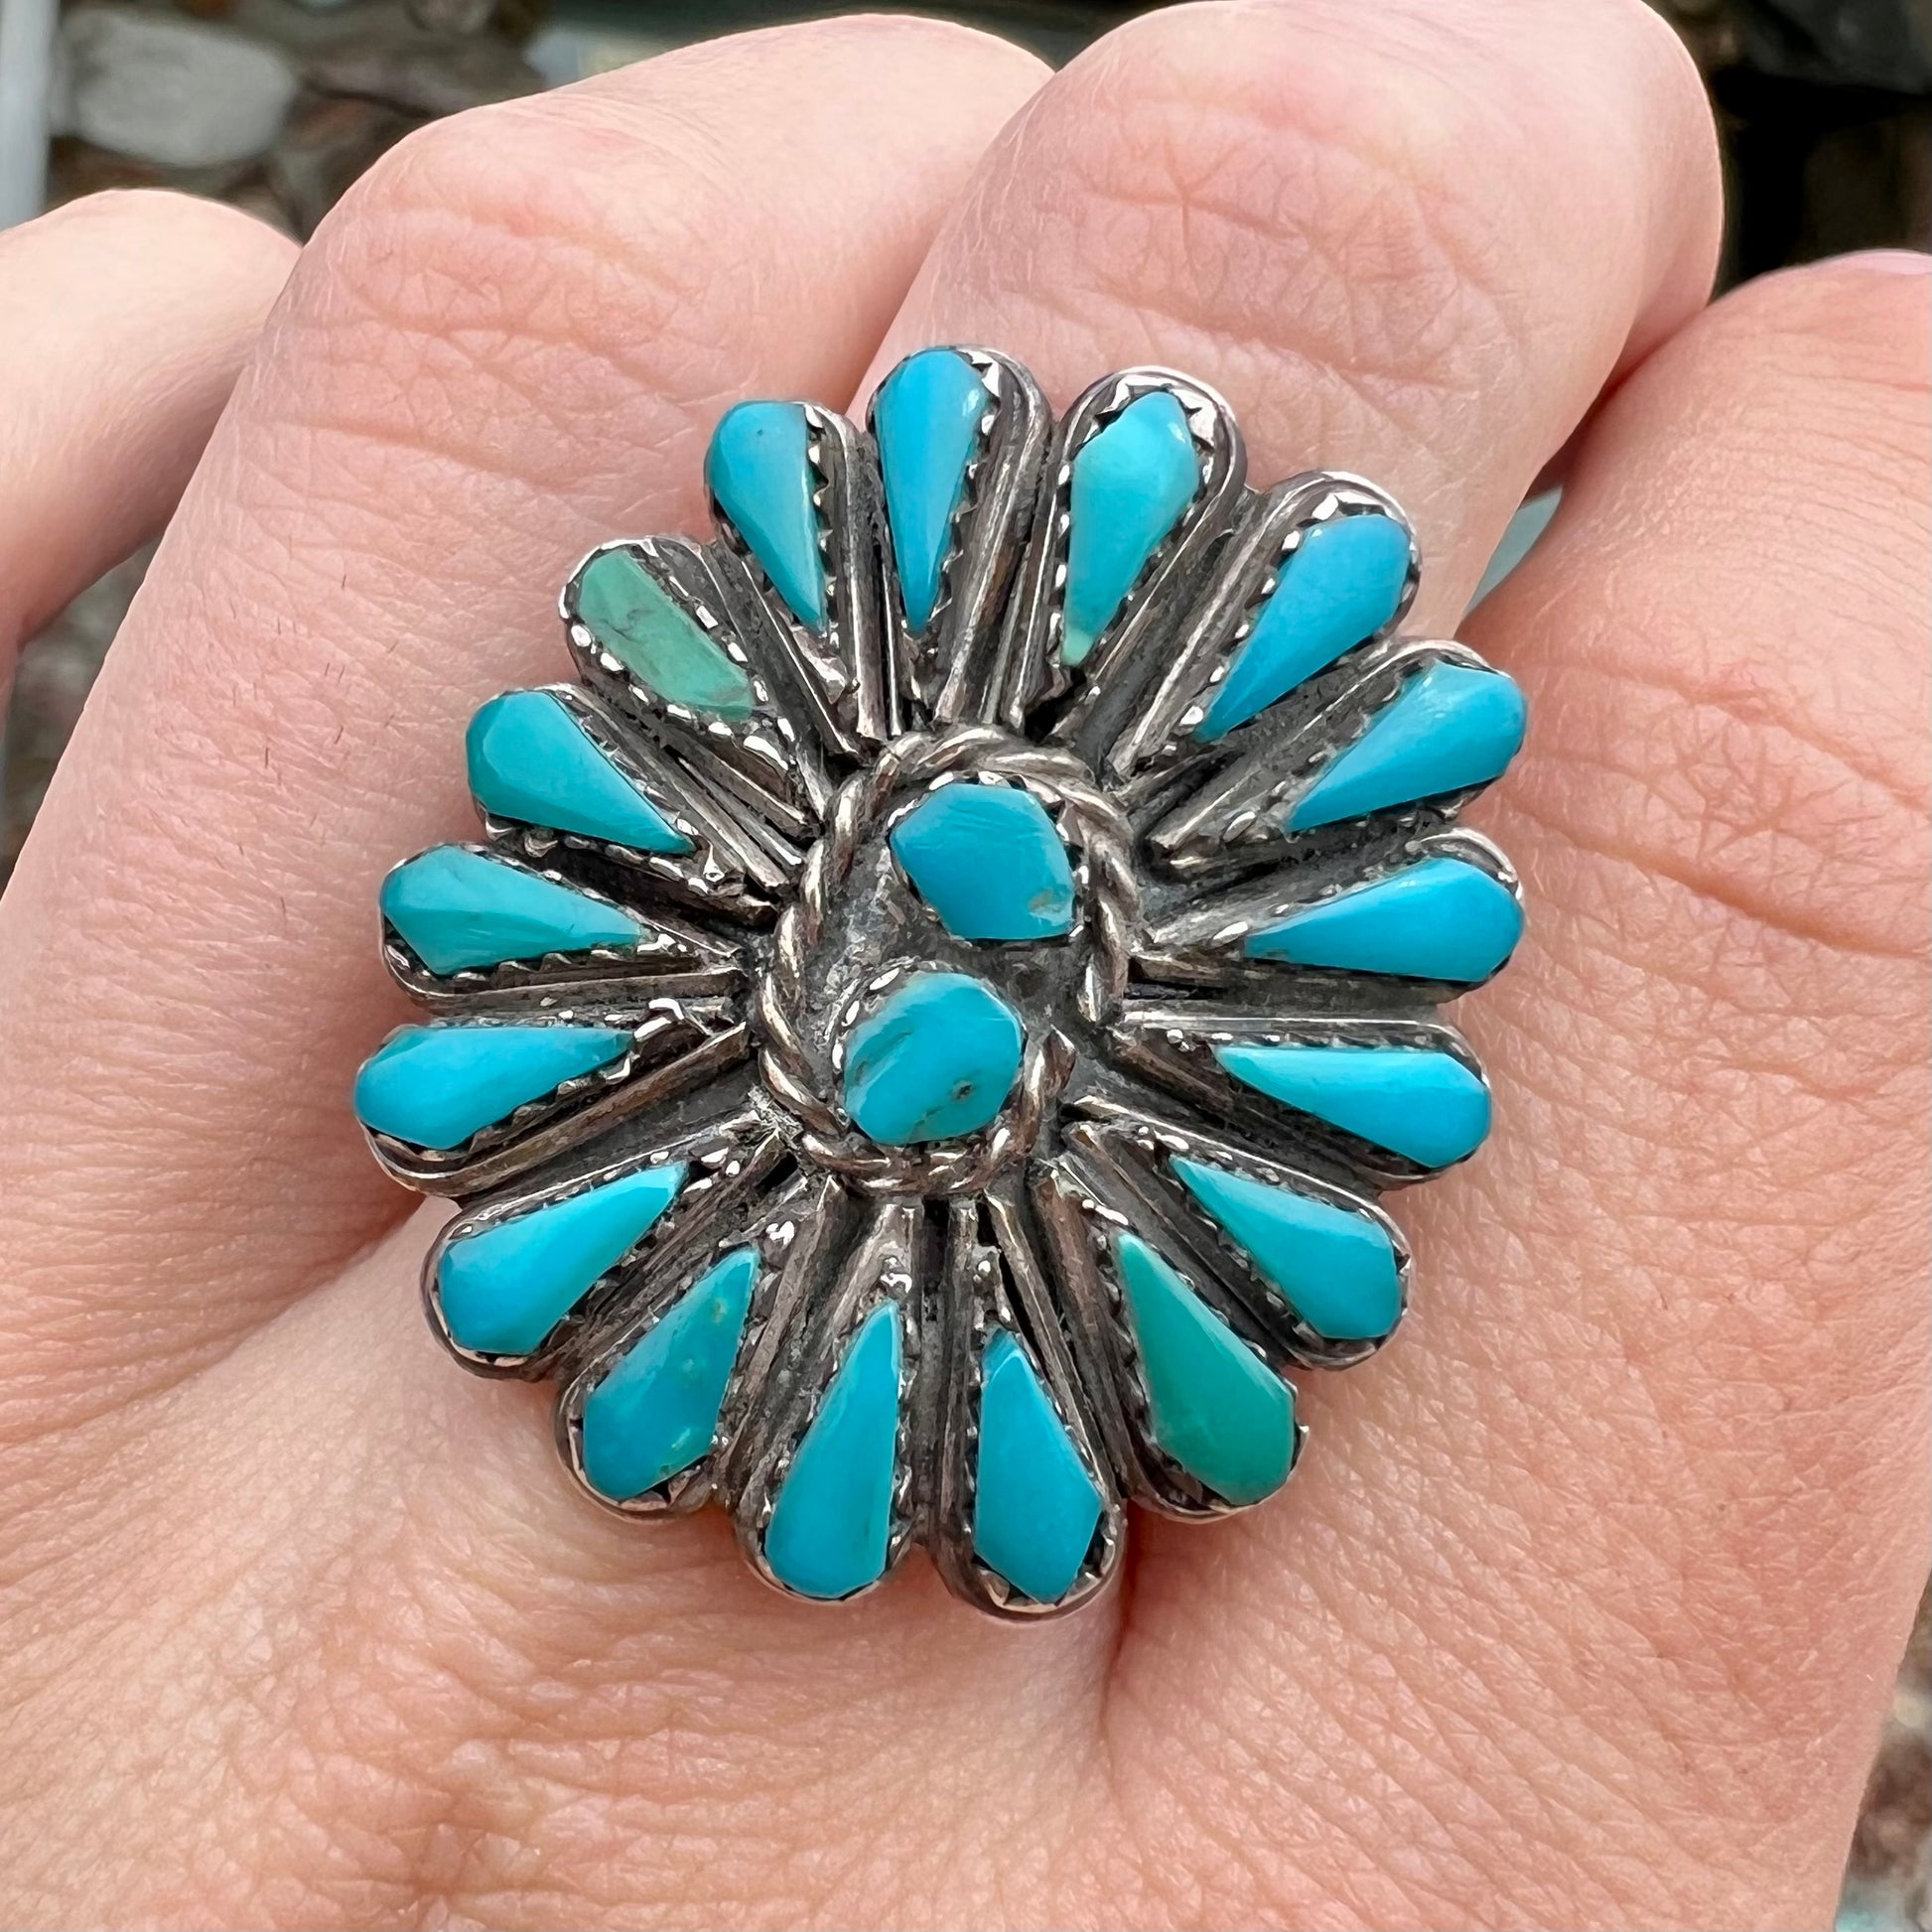 A handmade, sterling silver Zuni Indian ring petit point set with turquoise stones.  The ring has a split shank.